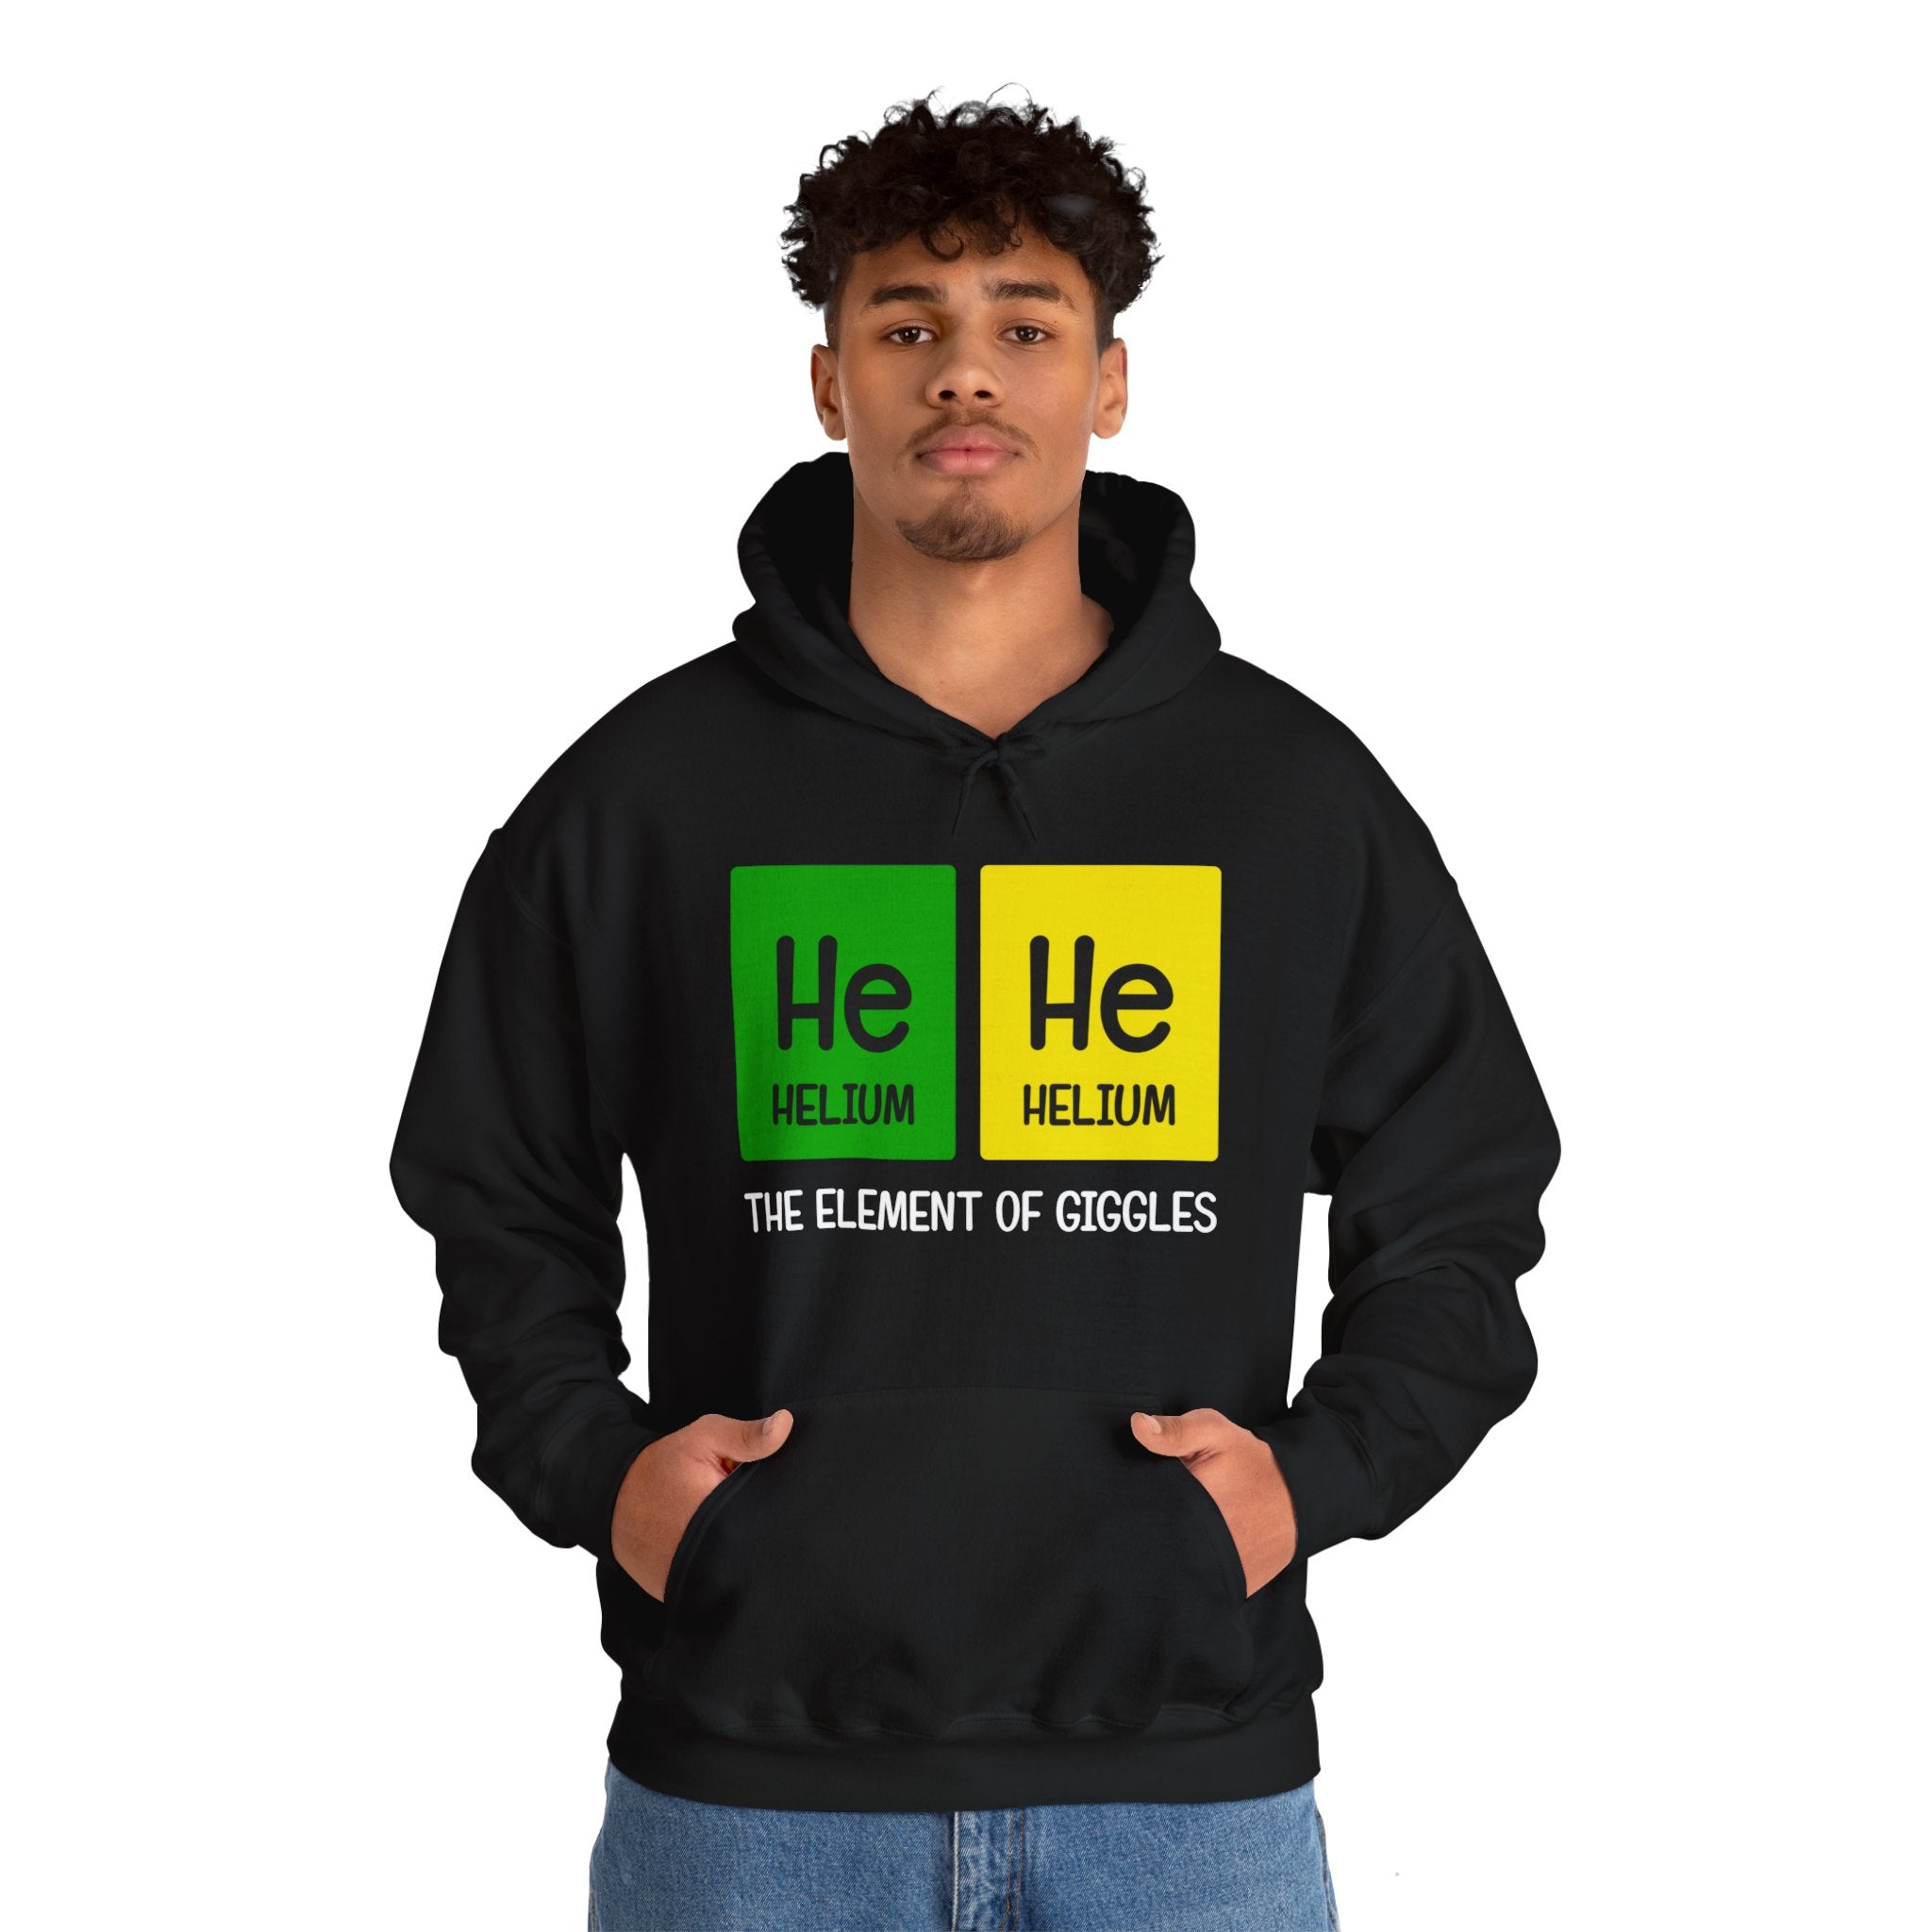 A person wearing a He-He - Hooded Sweatshirt with a periodic table design featuring "He-He designs" and "The Element of Giggles" text.